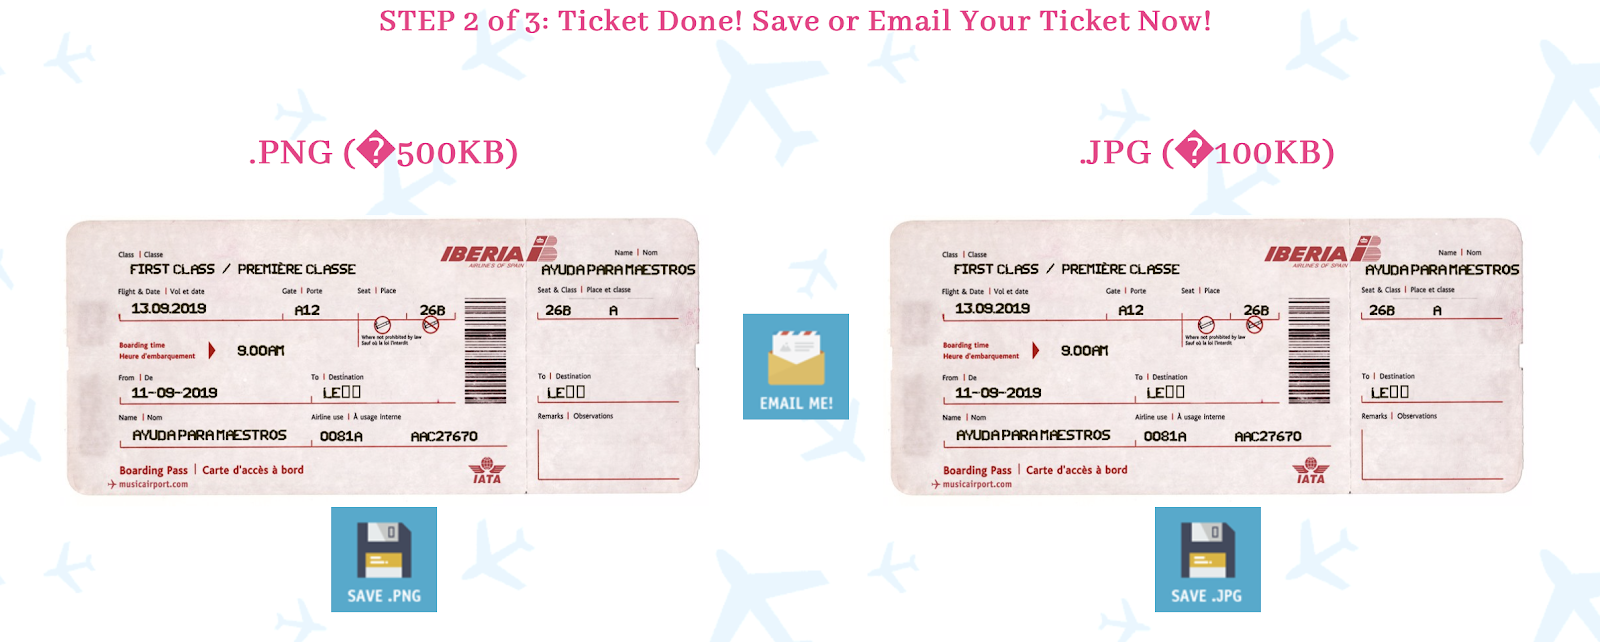 Php tickets